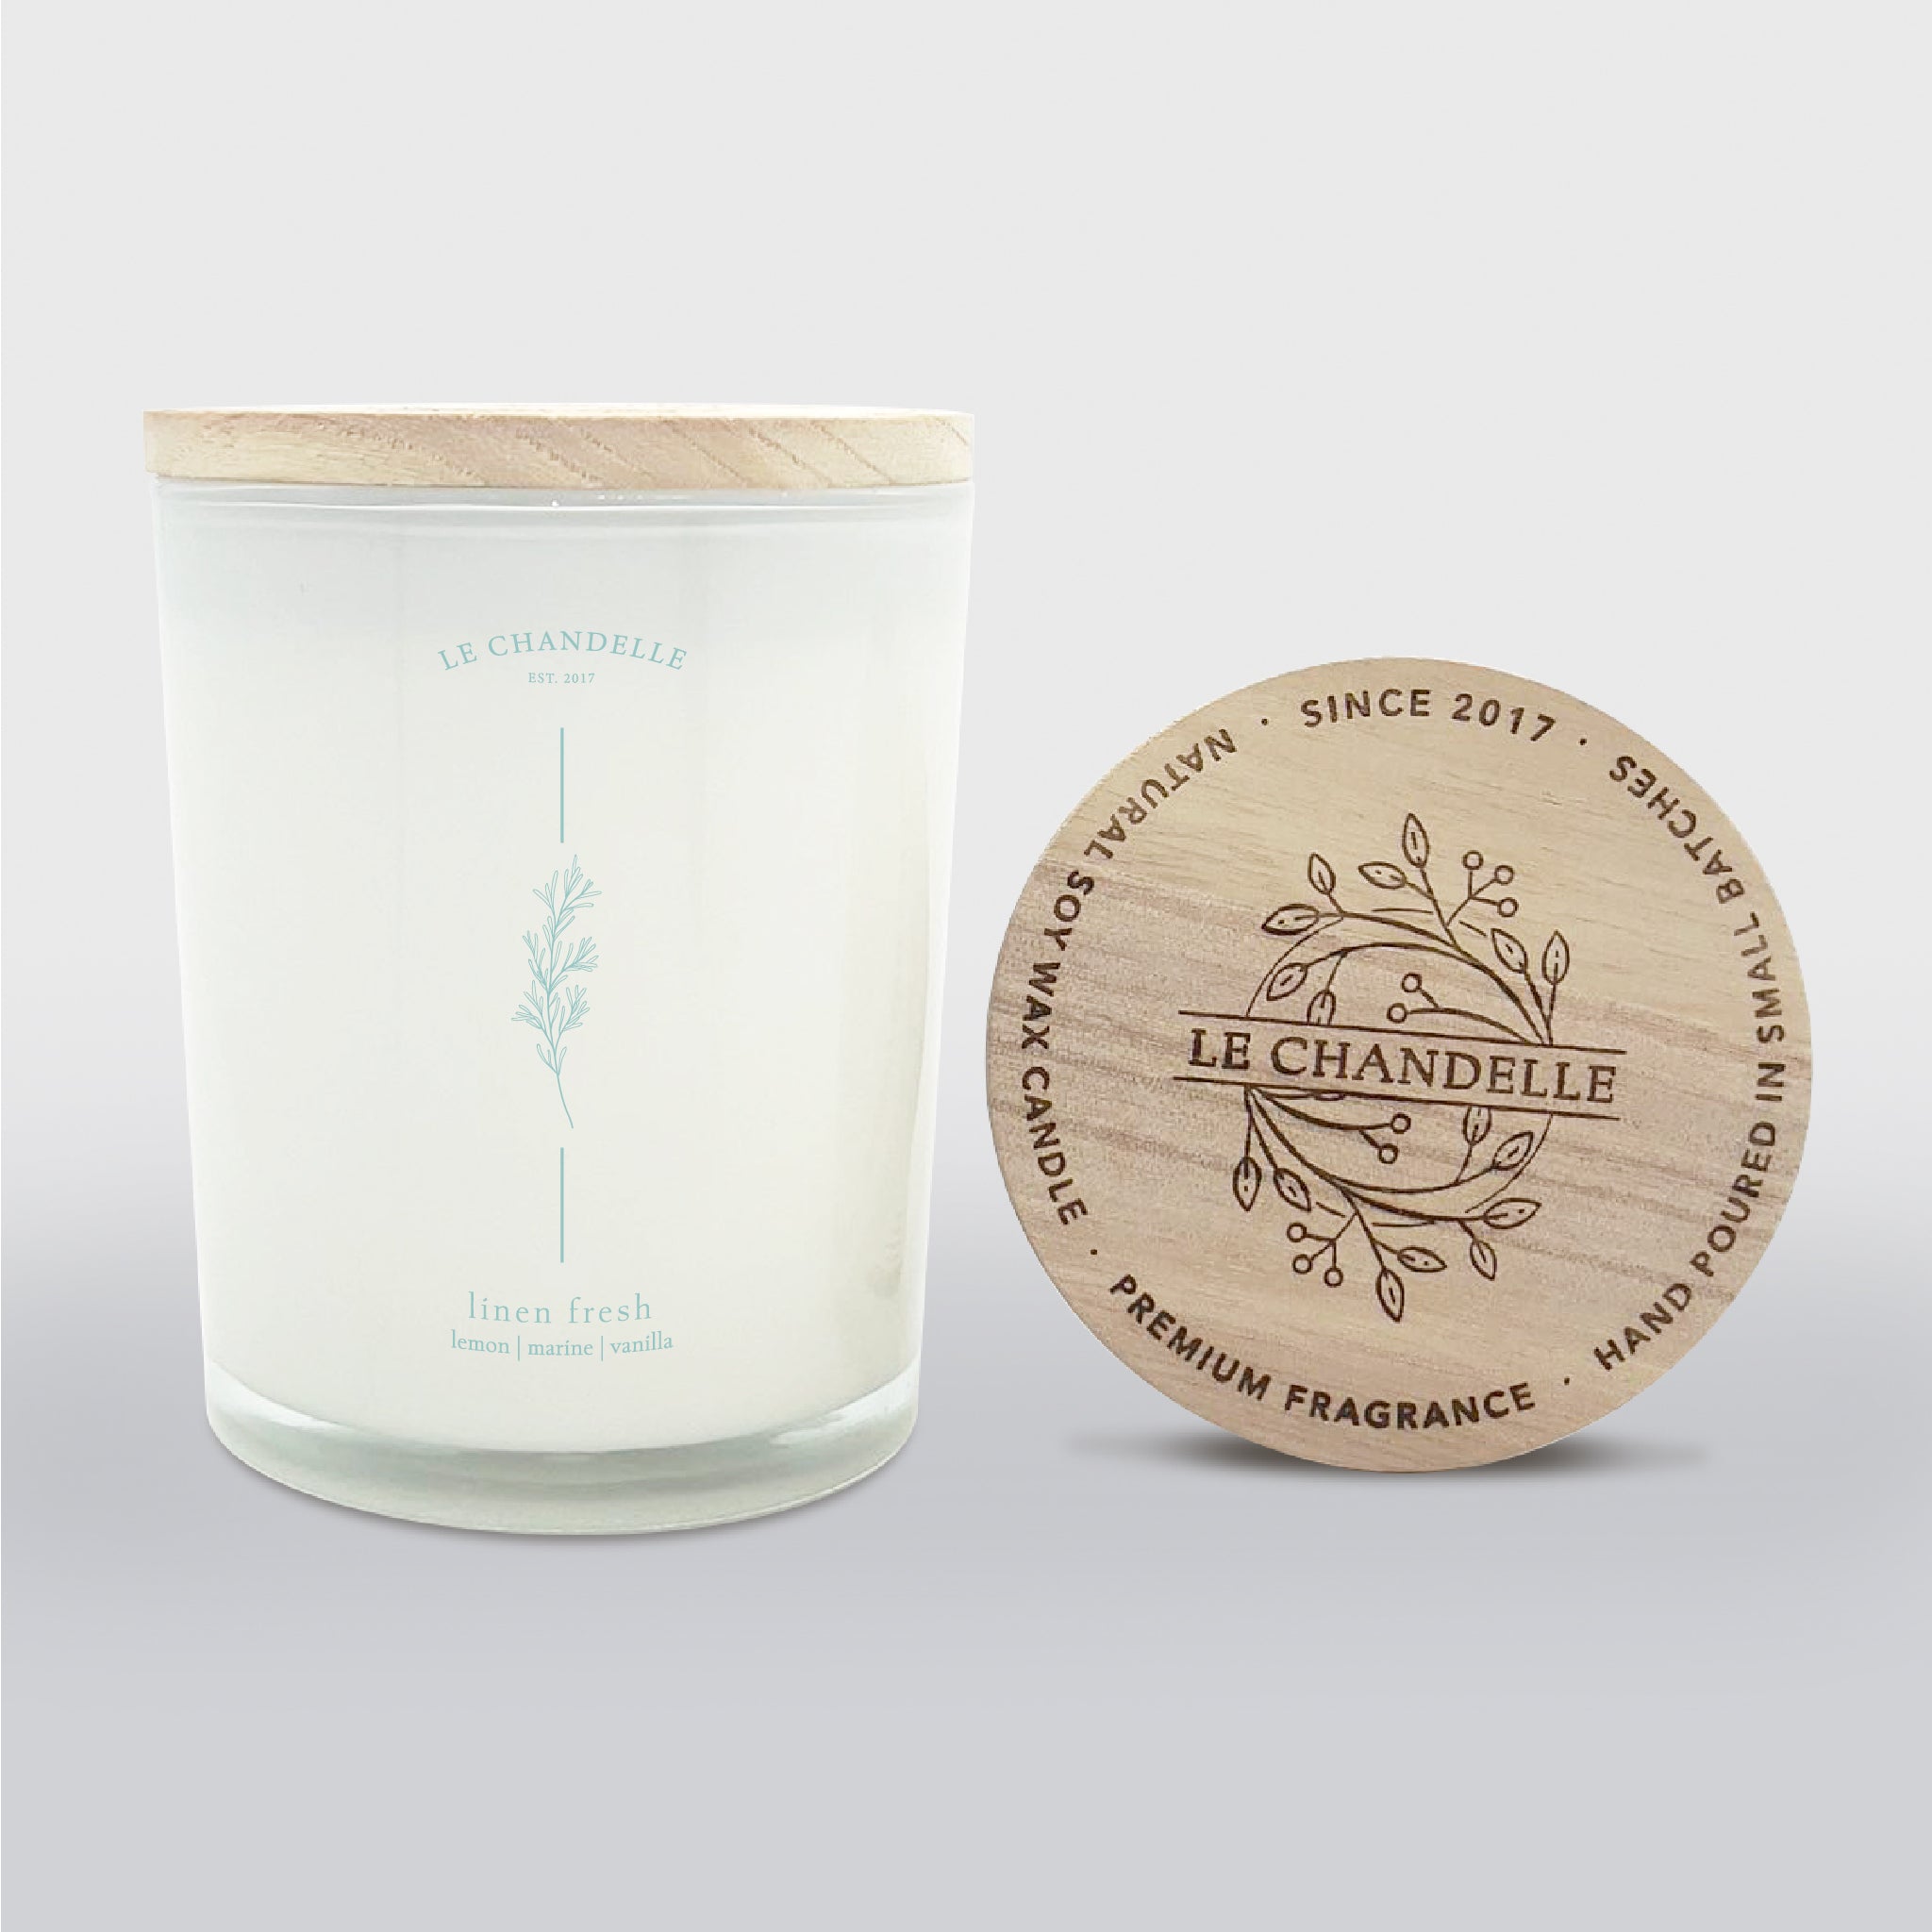 Fresh Linen – Chad Wicks Candle Co.